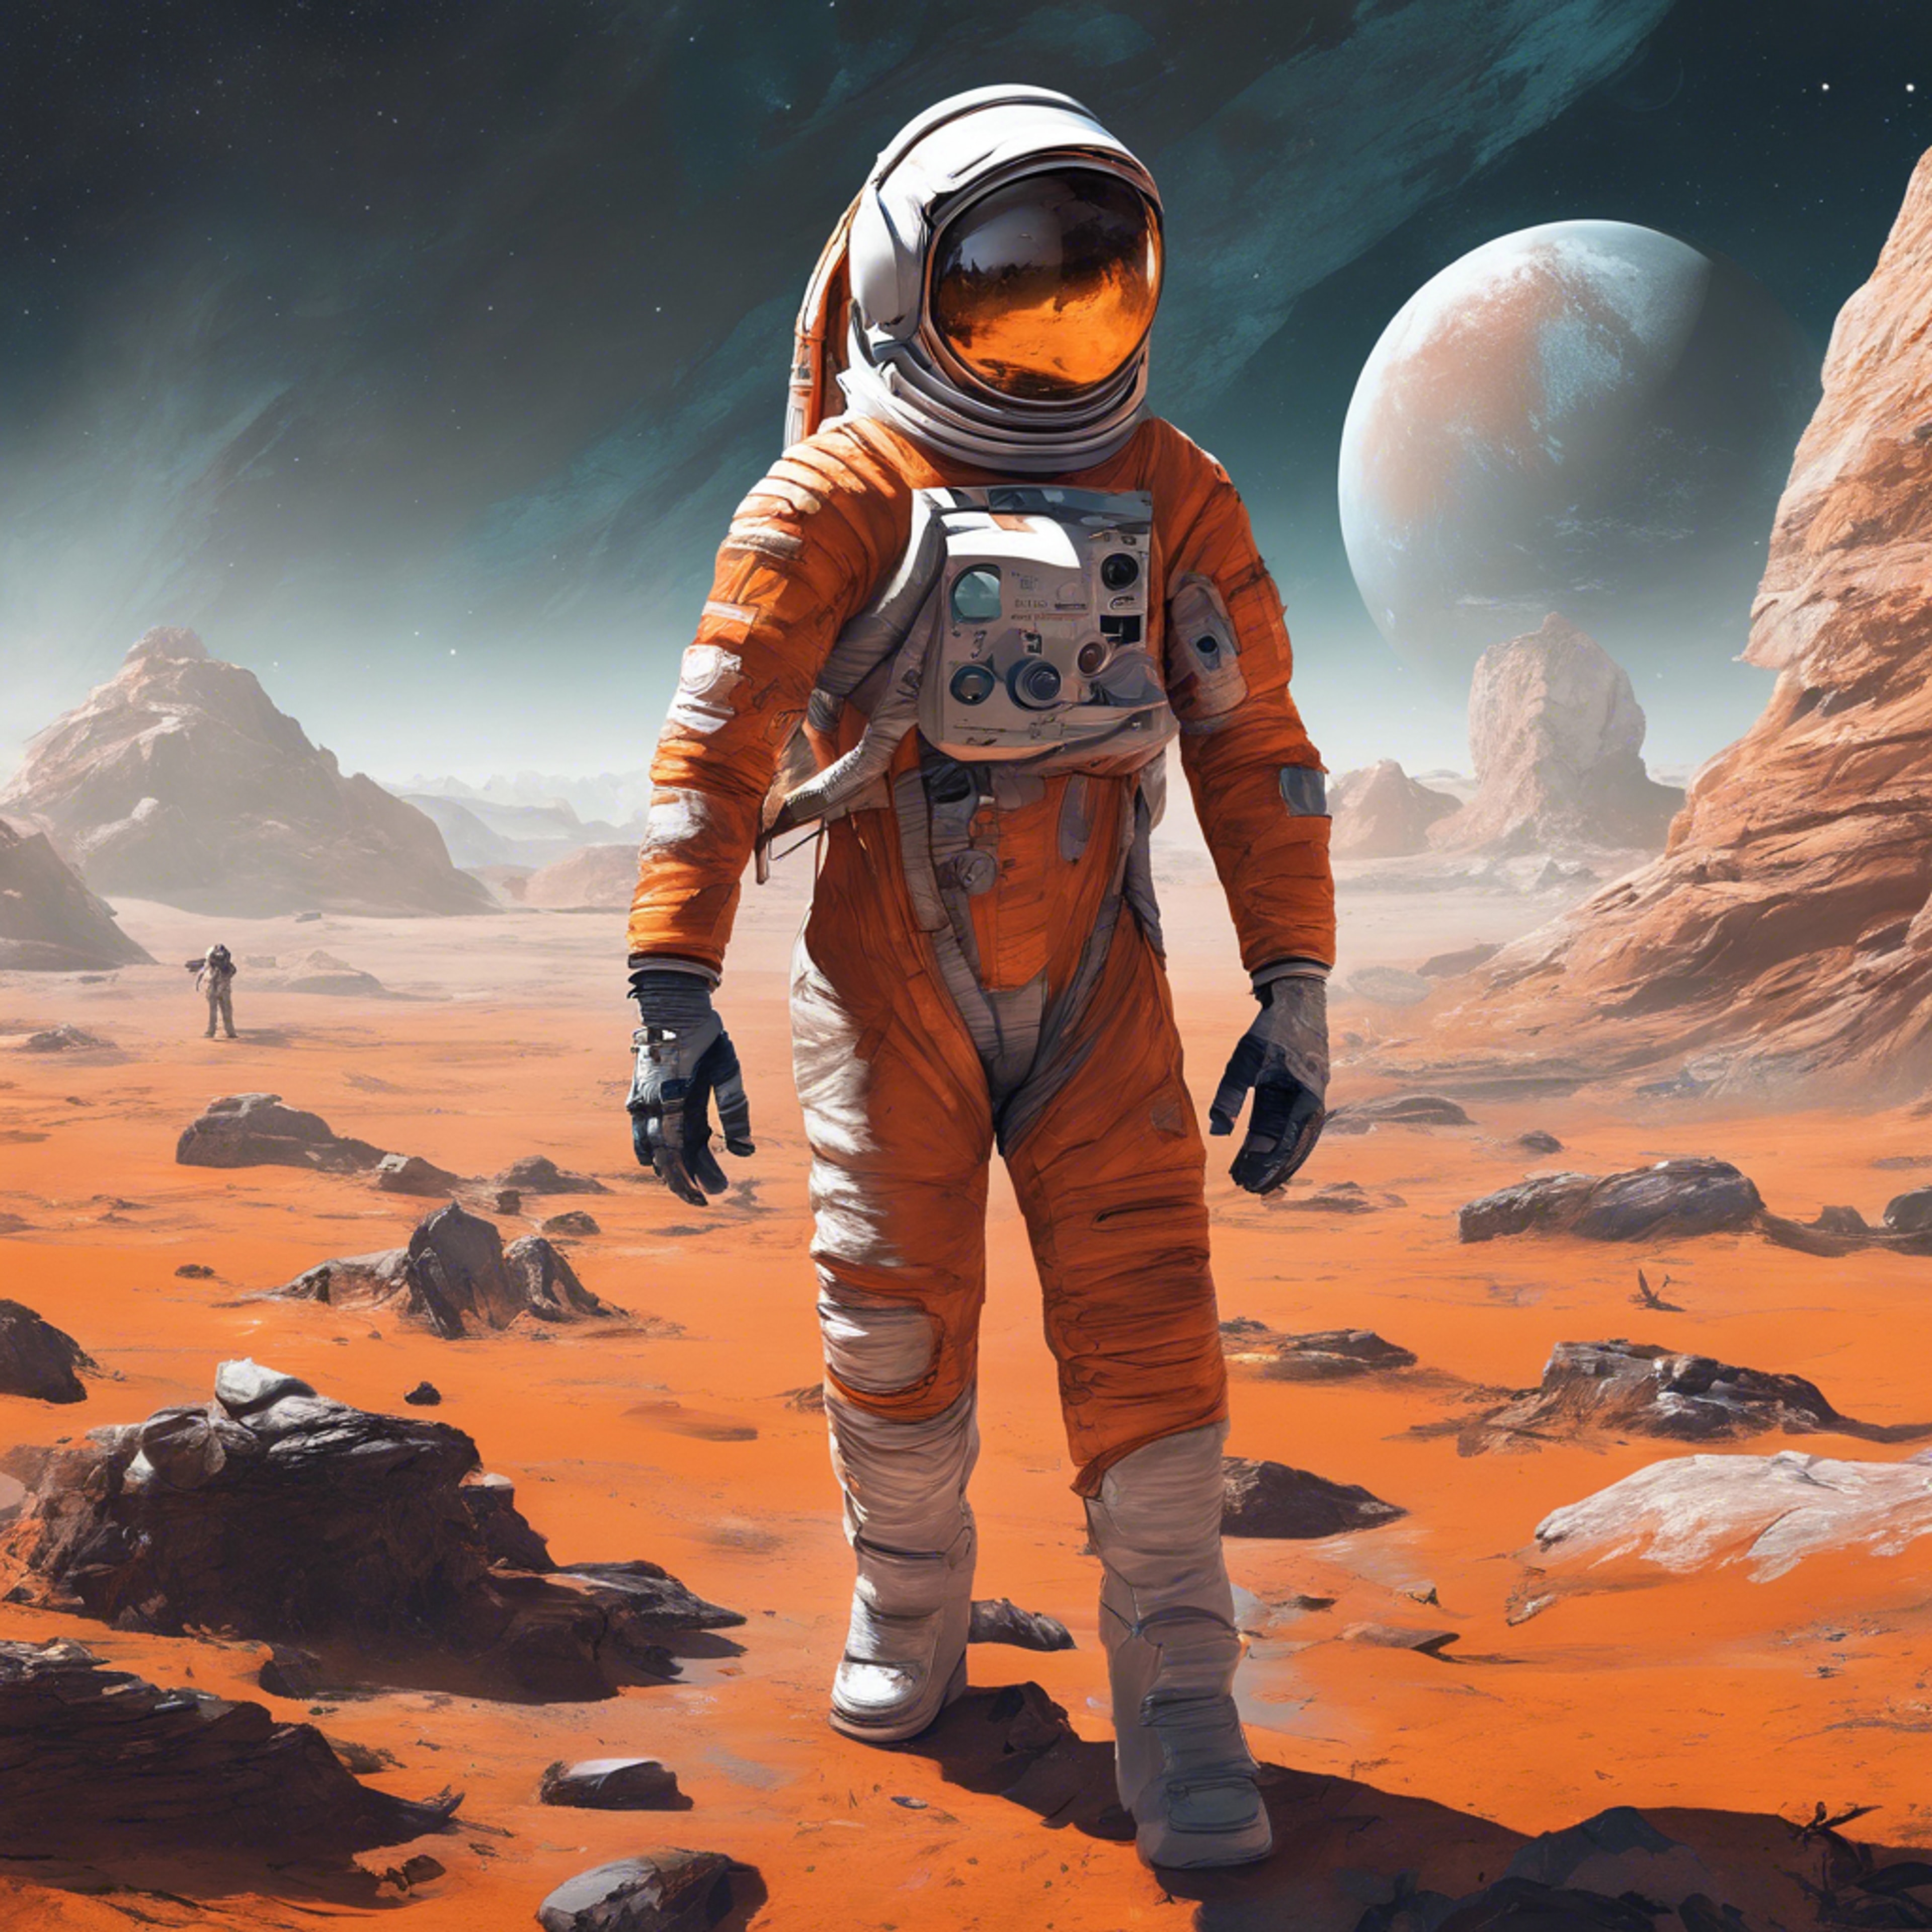 A space-themed video game featuring an astronaut in an orange and white suit exploring an alien planet. 벽지[5d2c49abc07a4c83ad01]